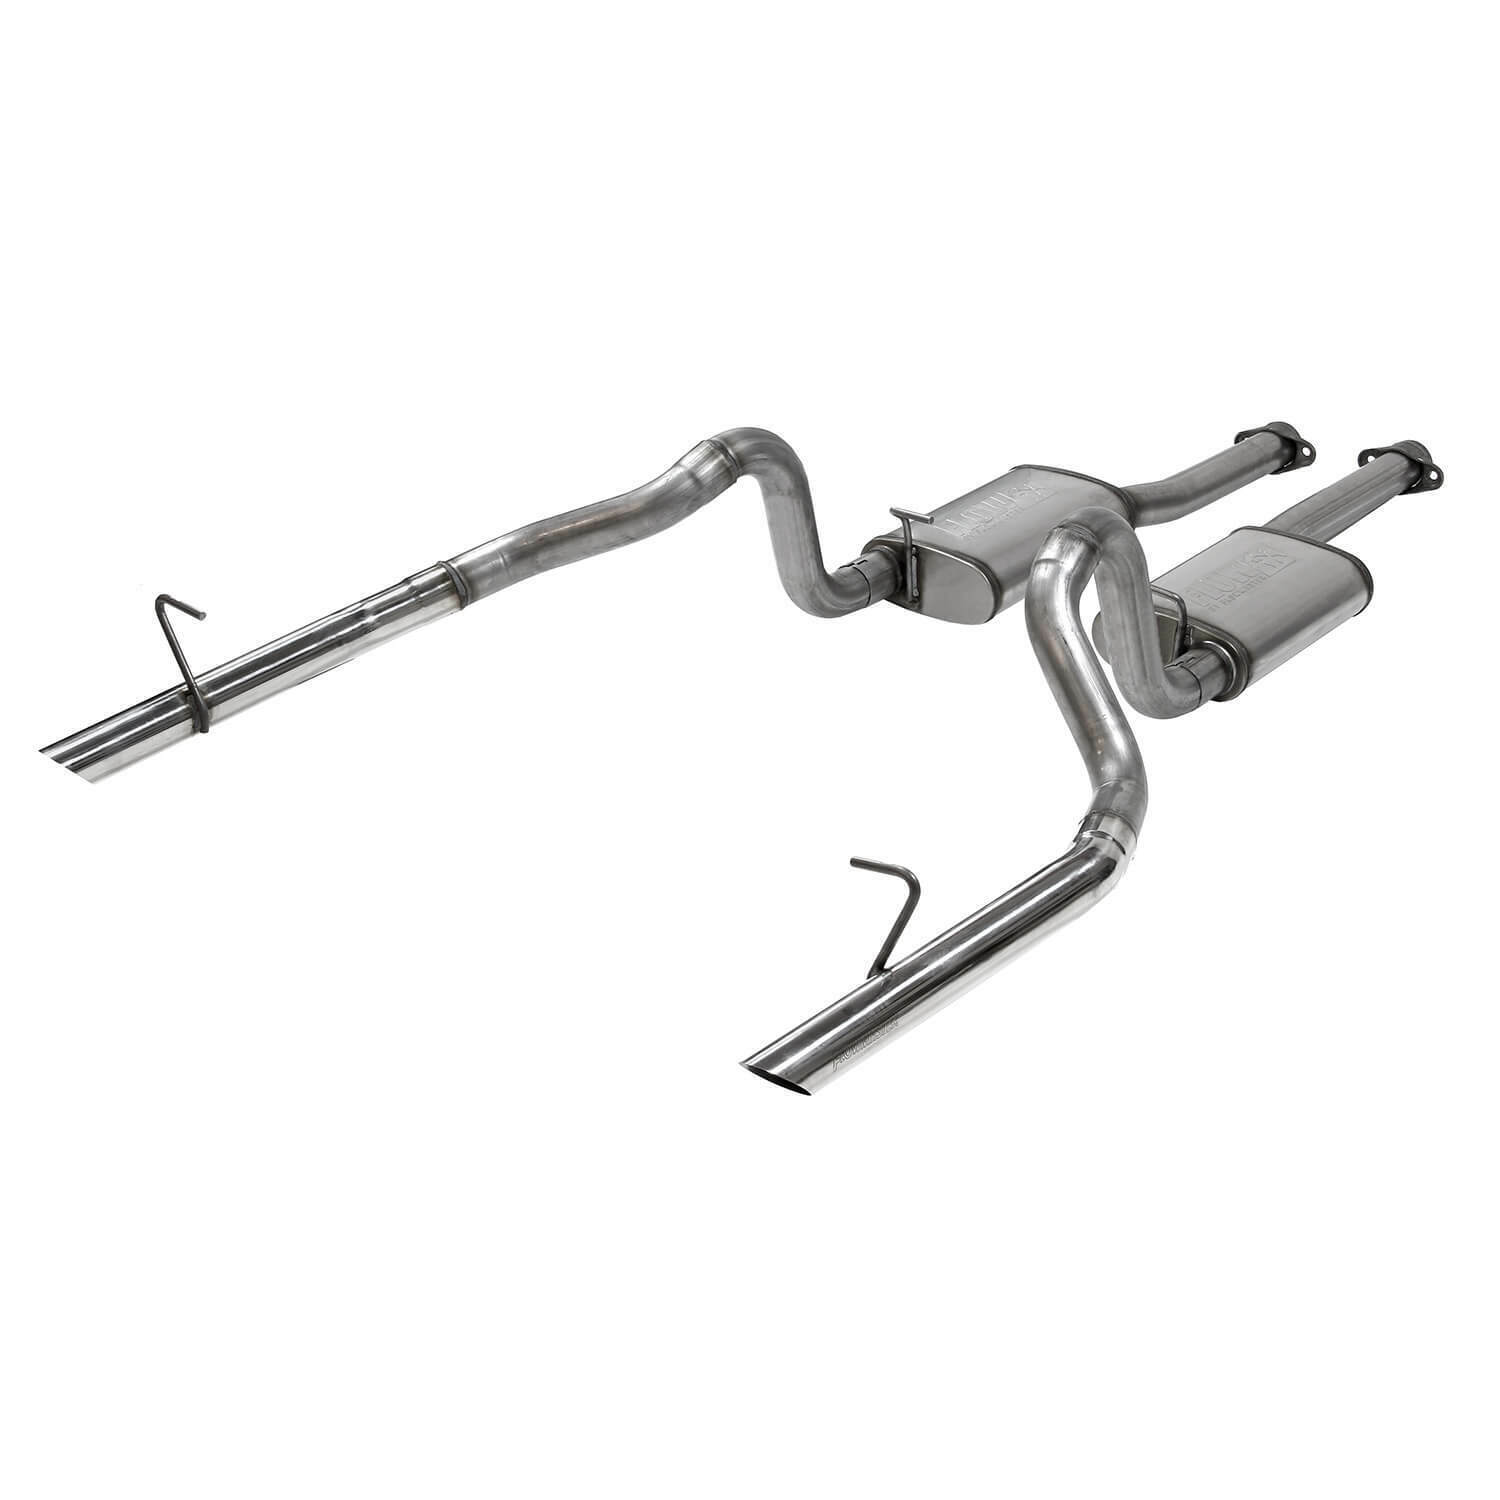 Flowmaster FlowFX CB Dual Exhaust System For 86-93 Ford Mustang LX 5.0L